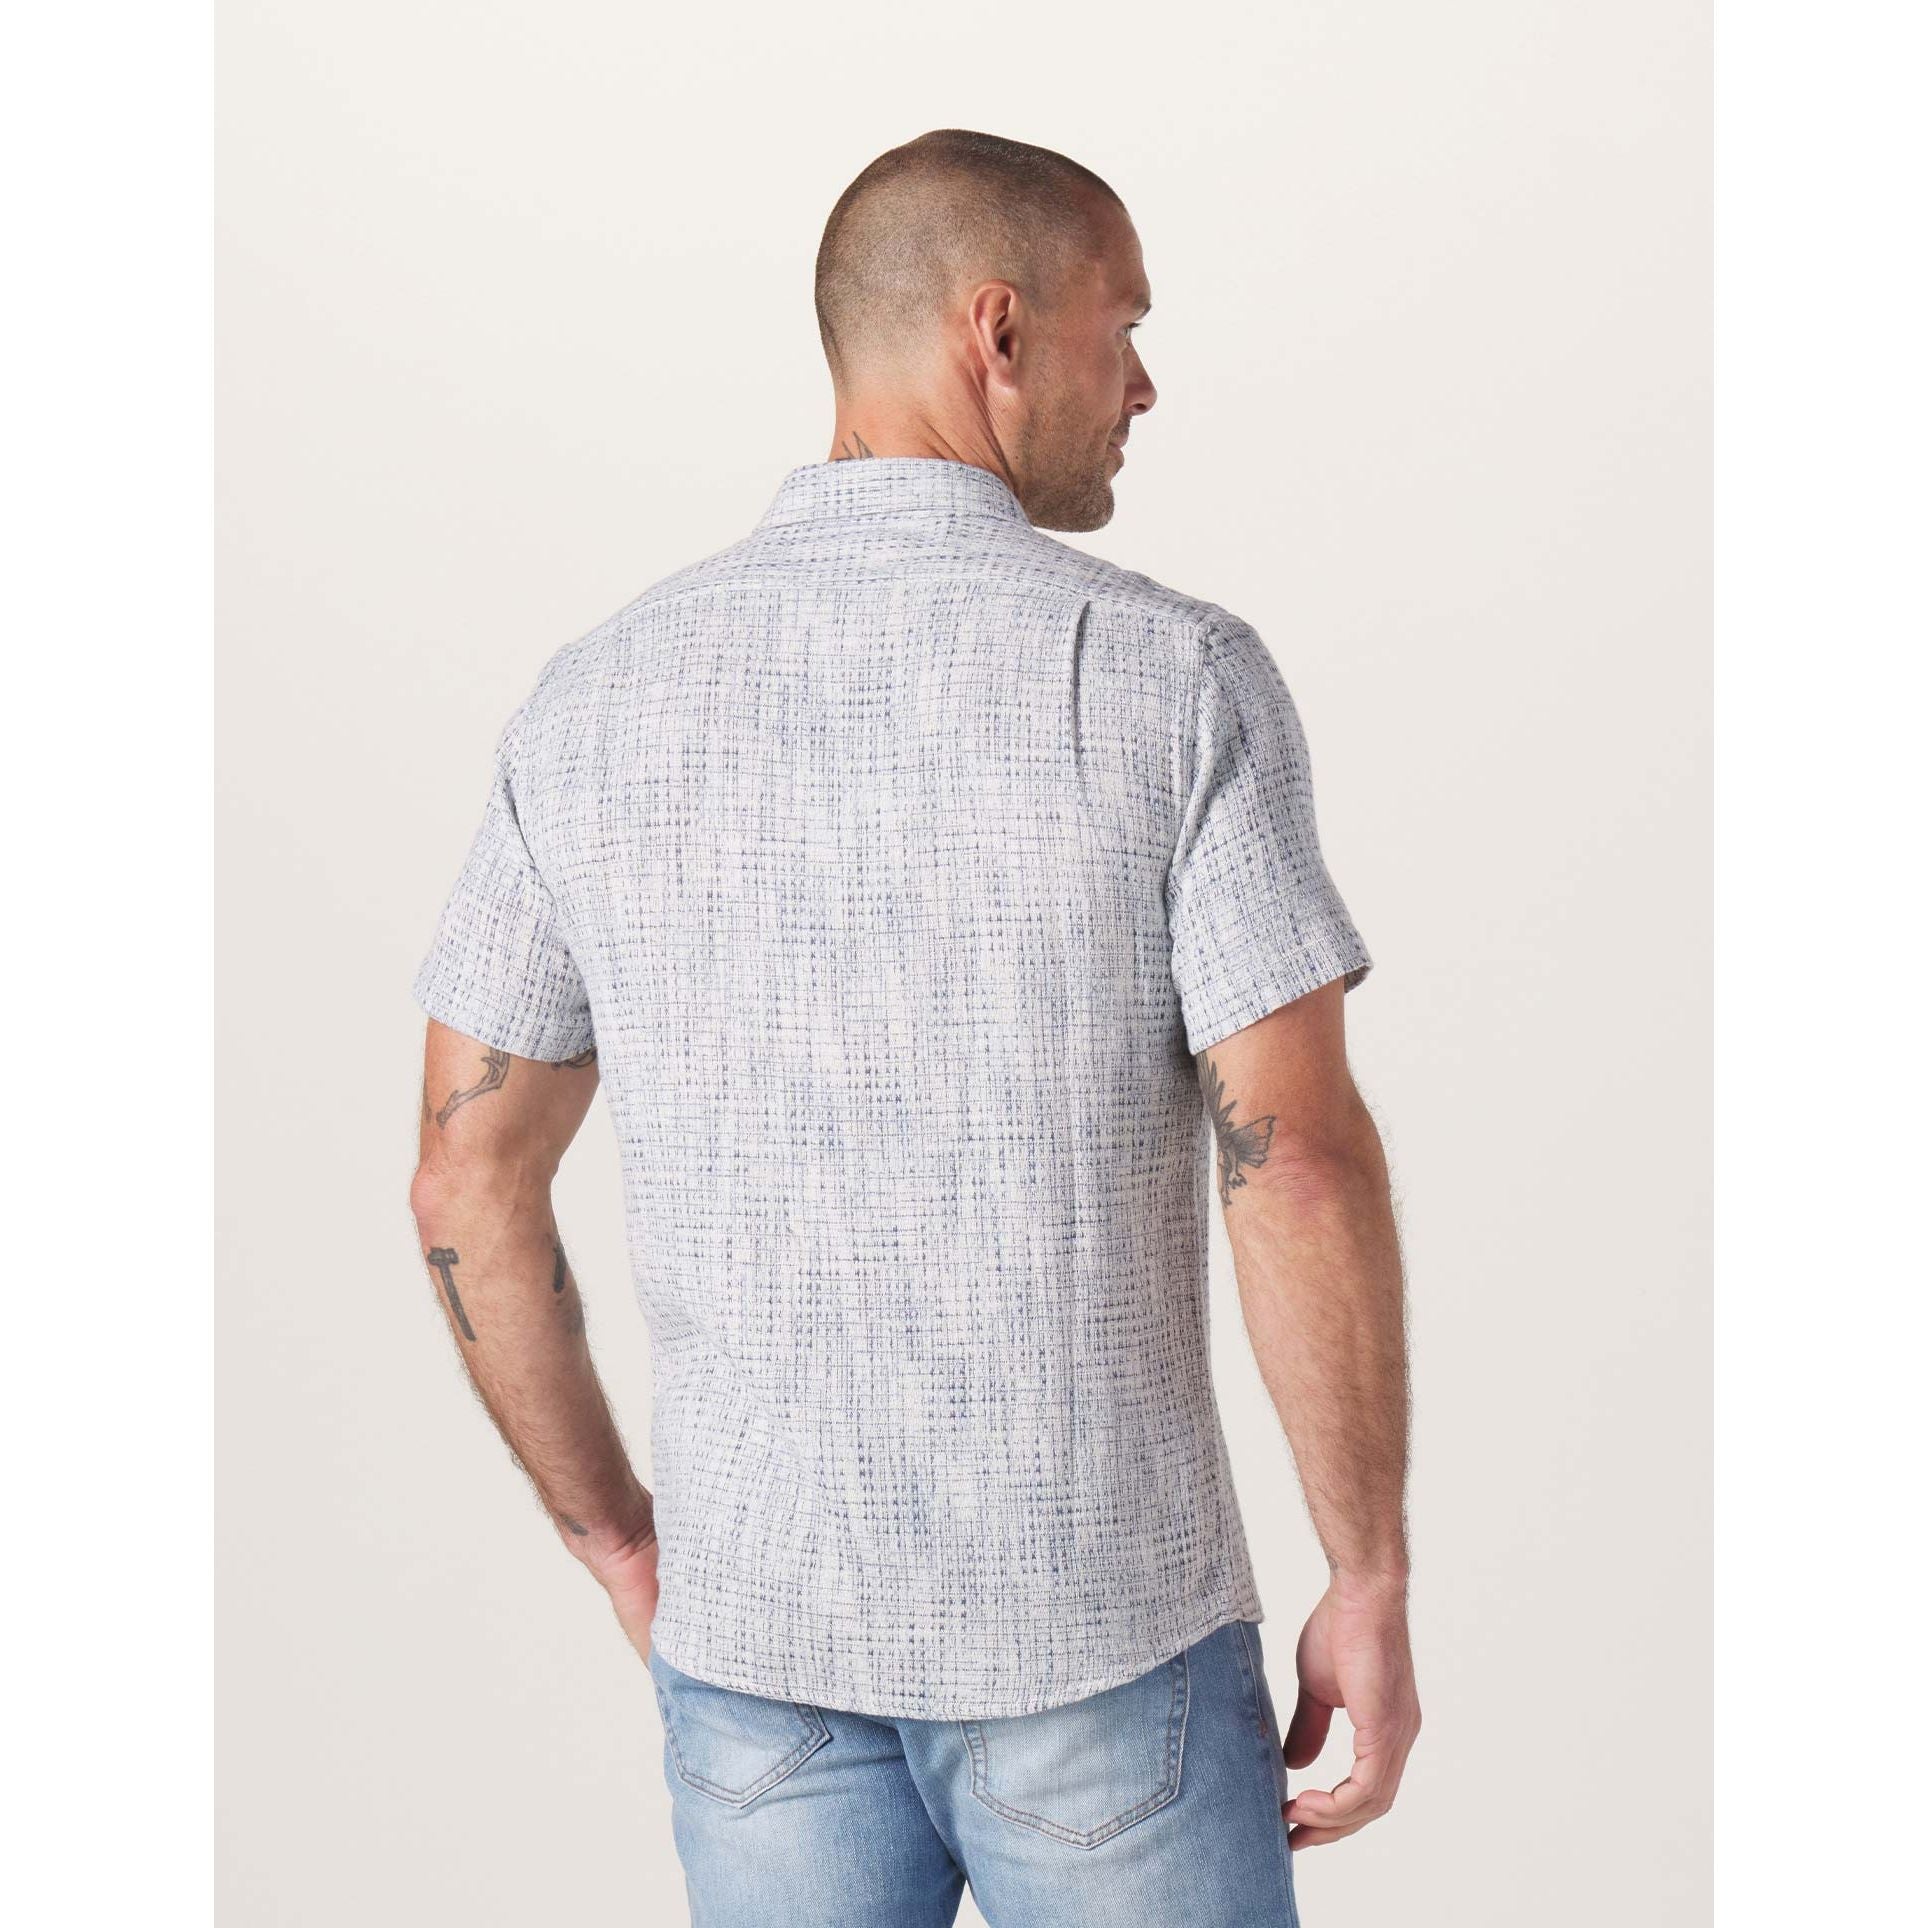 Normal Brand - Freshwater Short Sleeve Button Up Shirt in Blue Multi